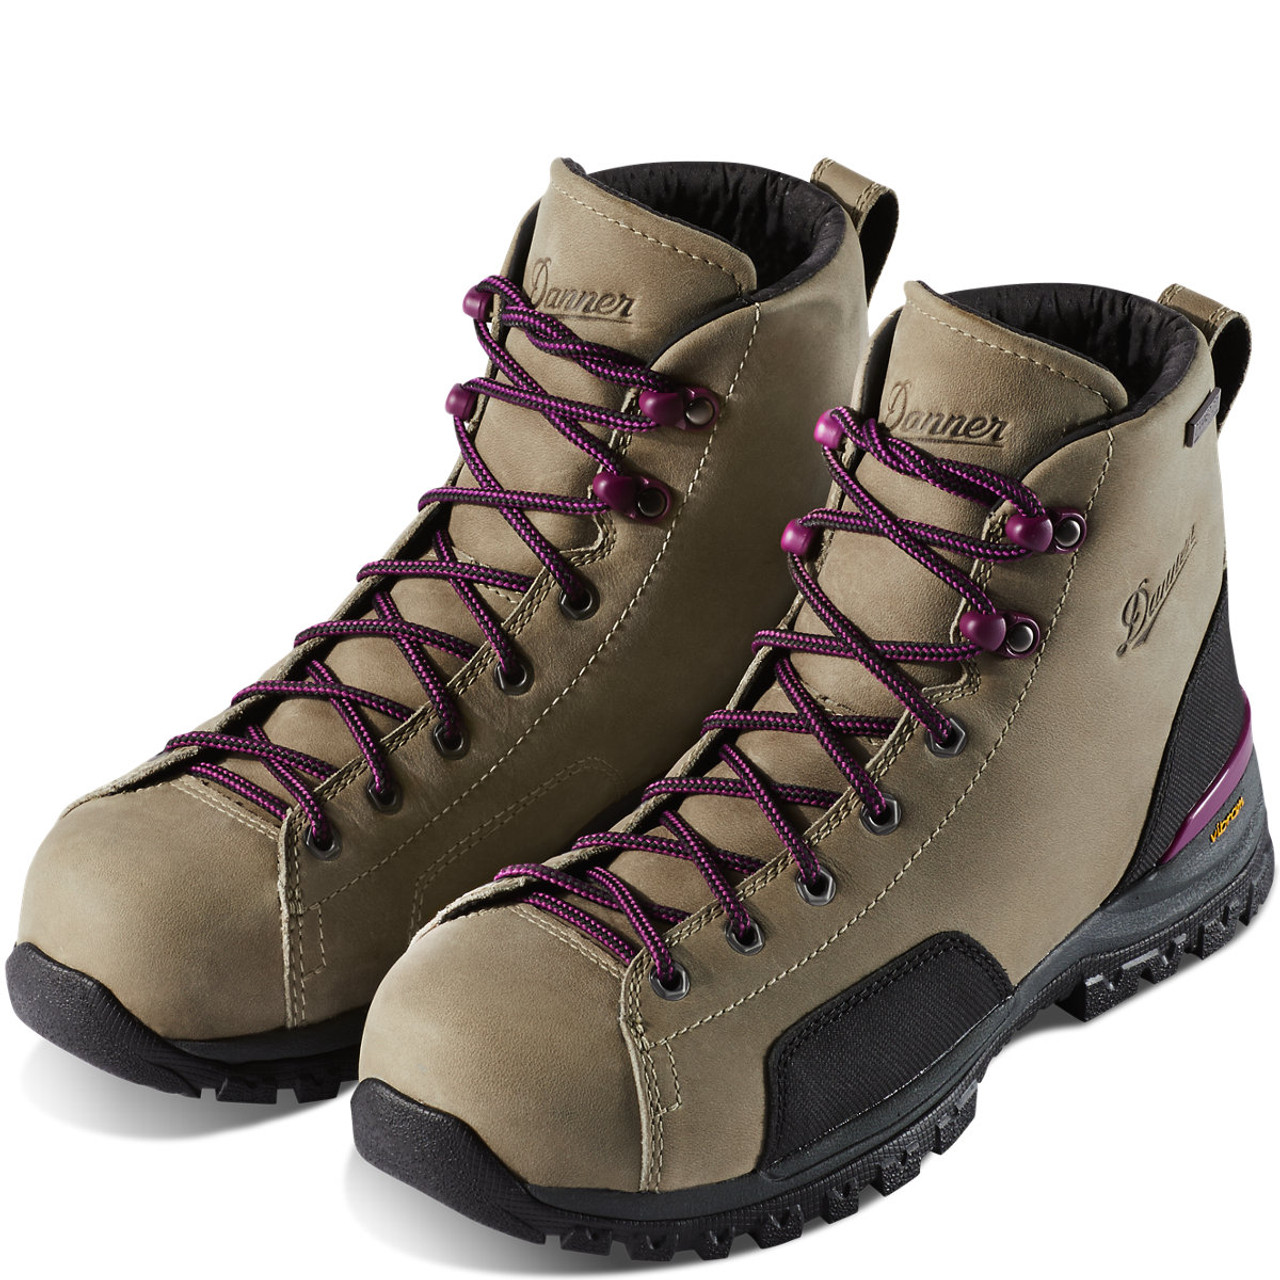 DANNER® STRONGHOLD WOMEN'S SIZING 5" GRAY COMPOSITE TOE (NMT) WORK BOOTS 16717